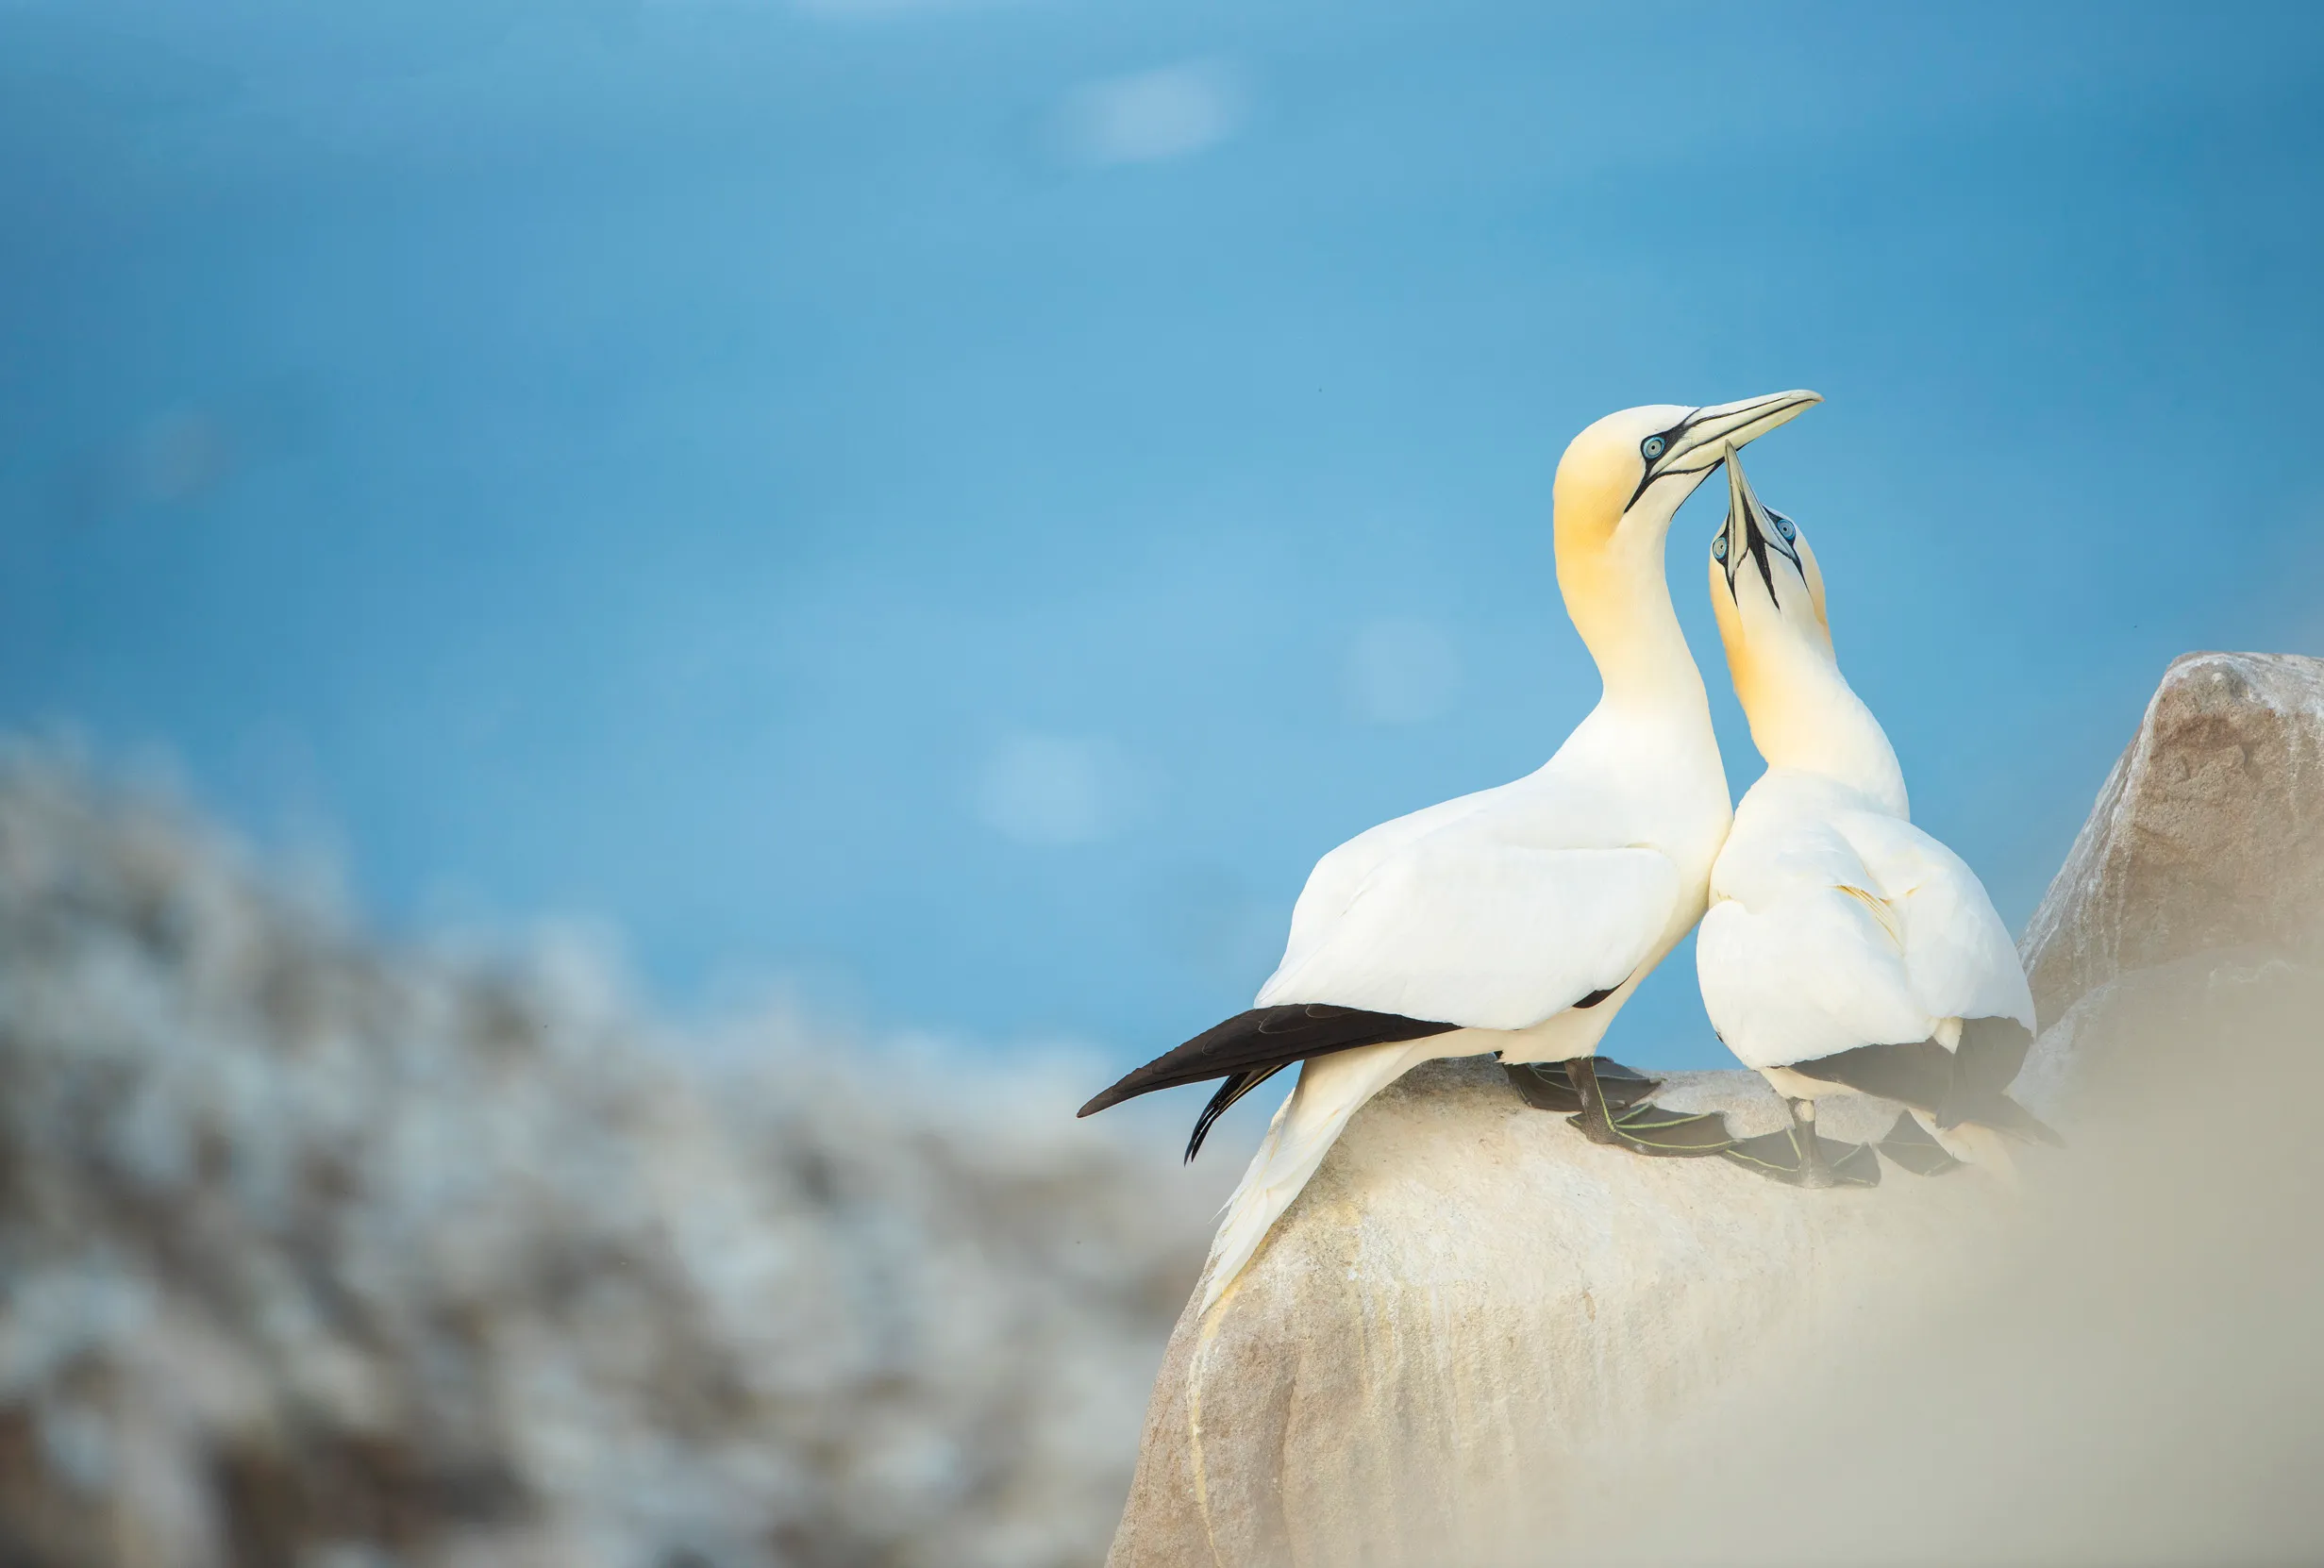 A pair of Gannets on the edge of a cliff next to the sea.